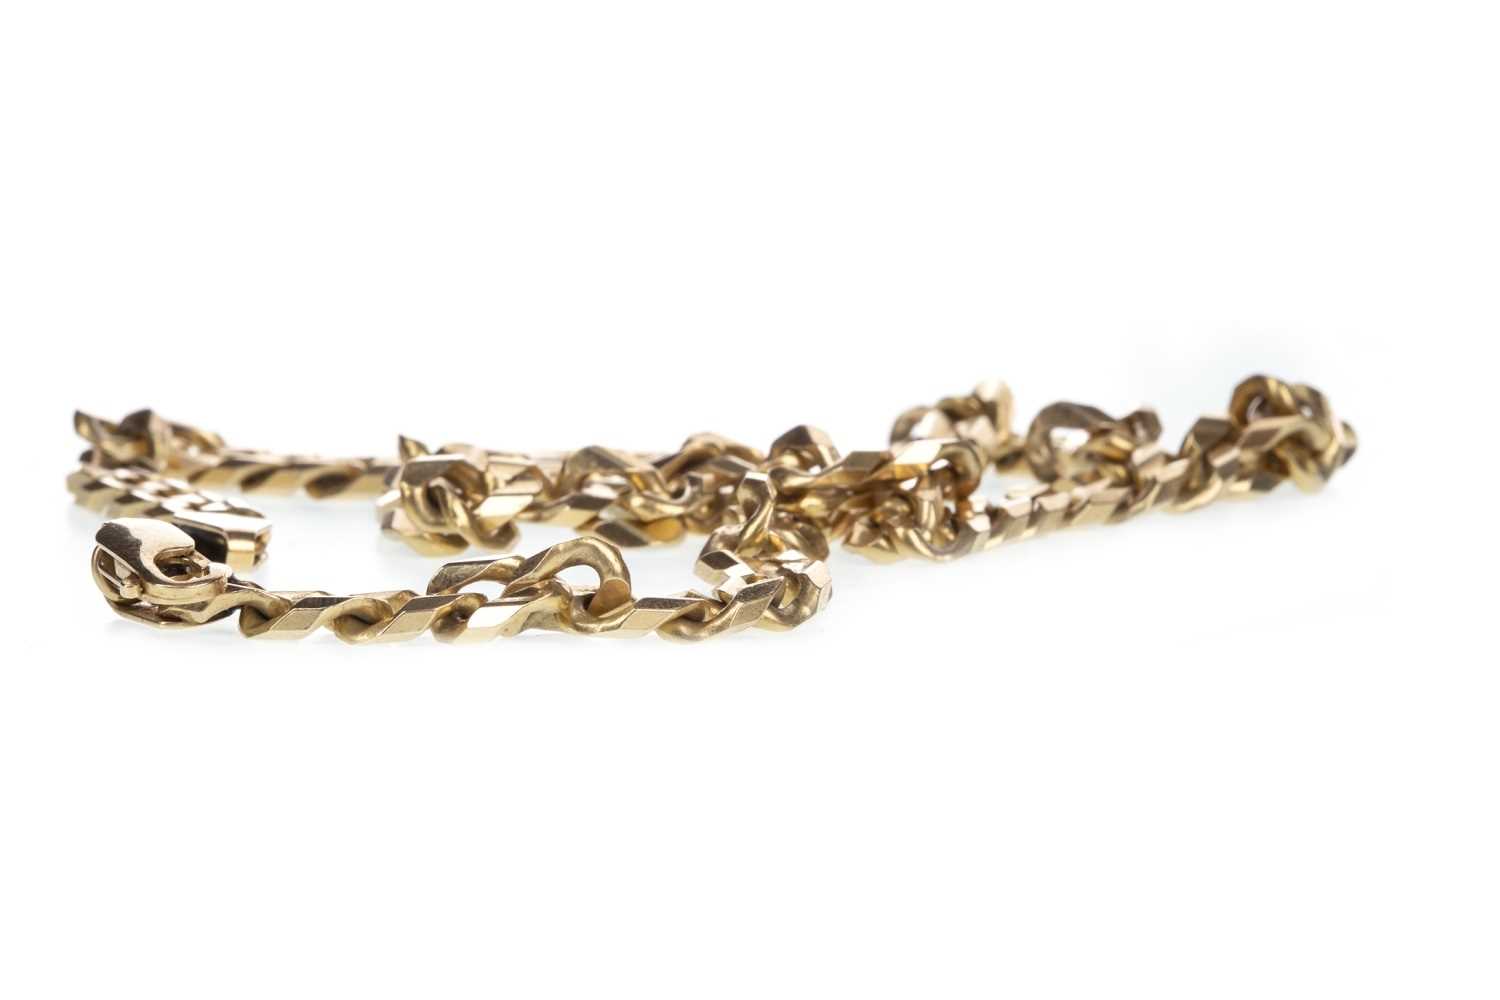 Lot 57 - A GOLD NECKLACE